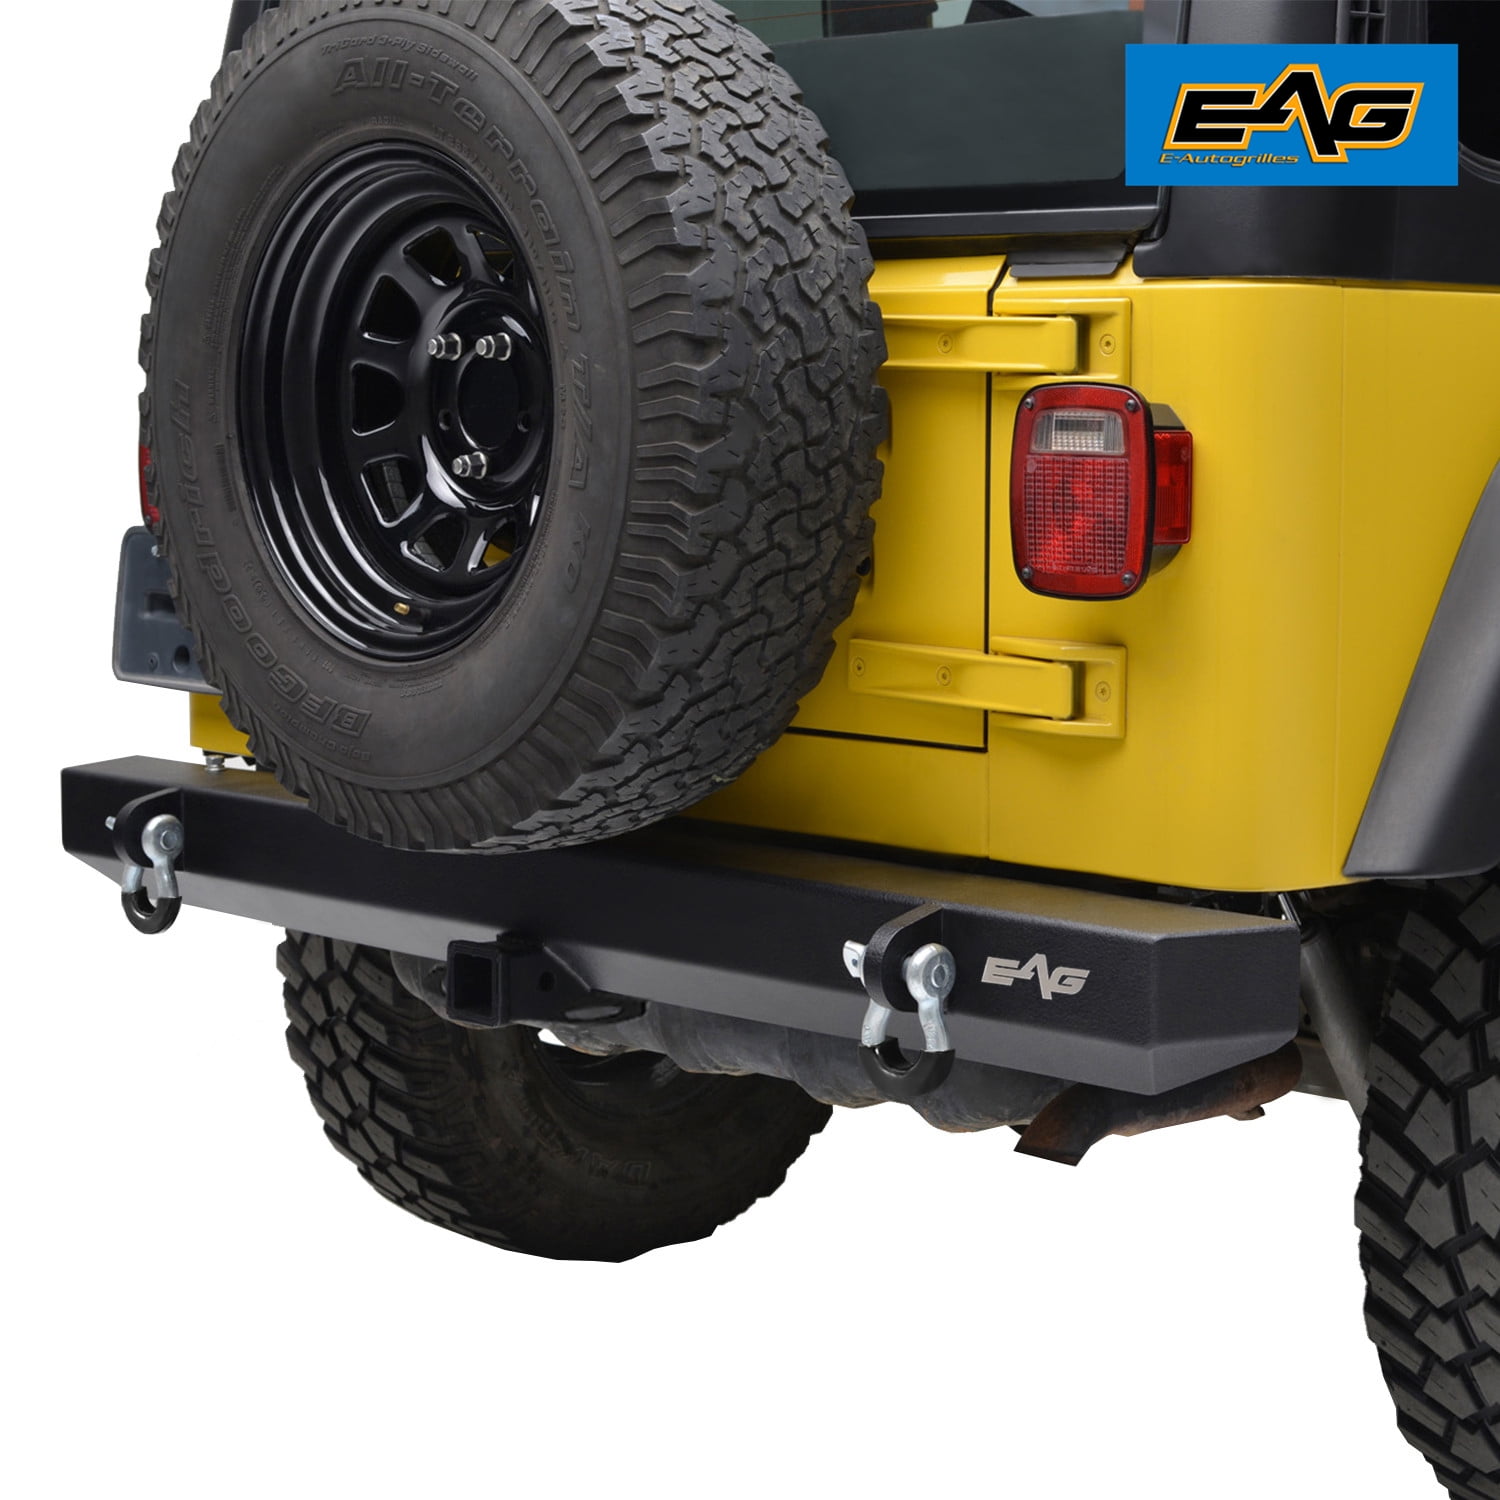 Buy EAG Rear Bumper with 2 Hitch Receiver Off Road = fits 87-06 Jeep  Wrangler YJTJ Online at Lowest Price in Ubuy Nepal. 898489718